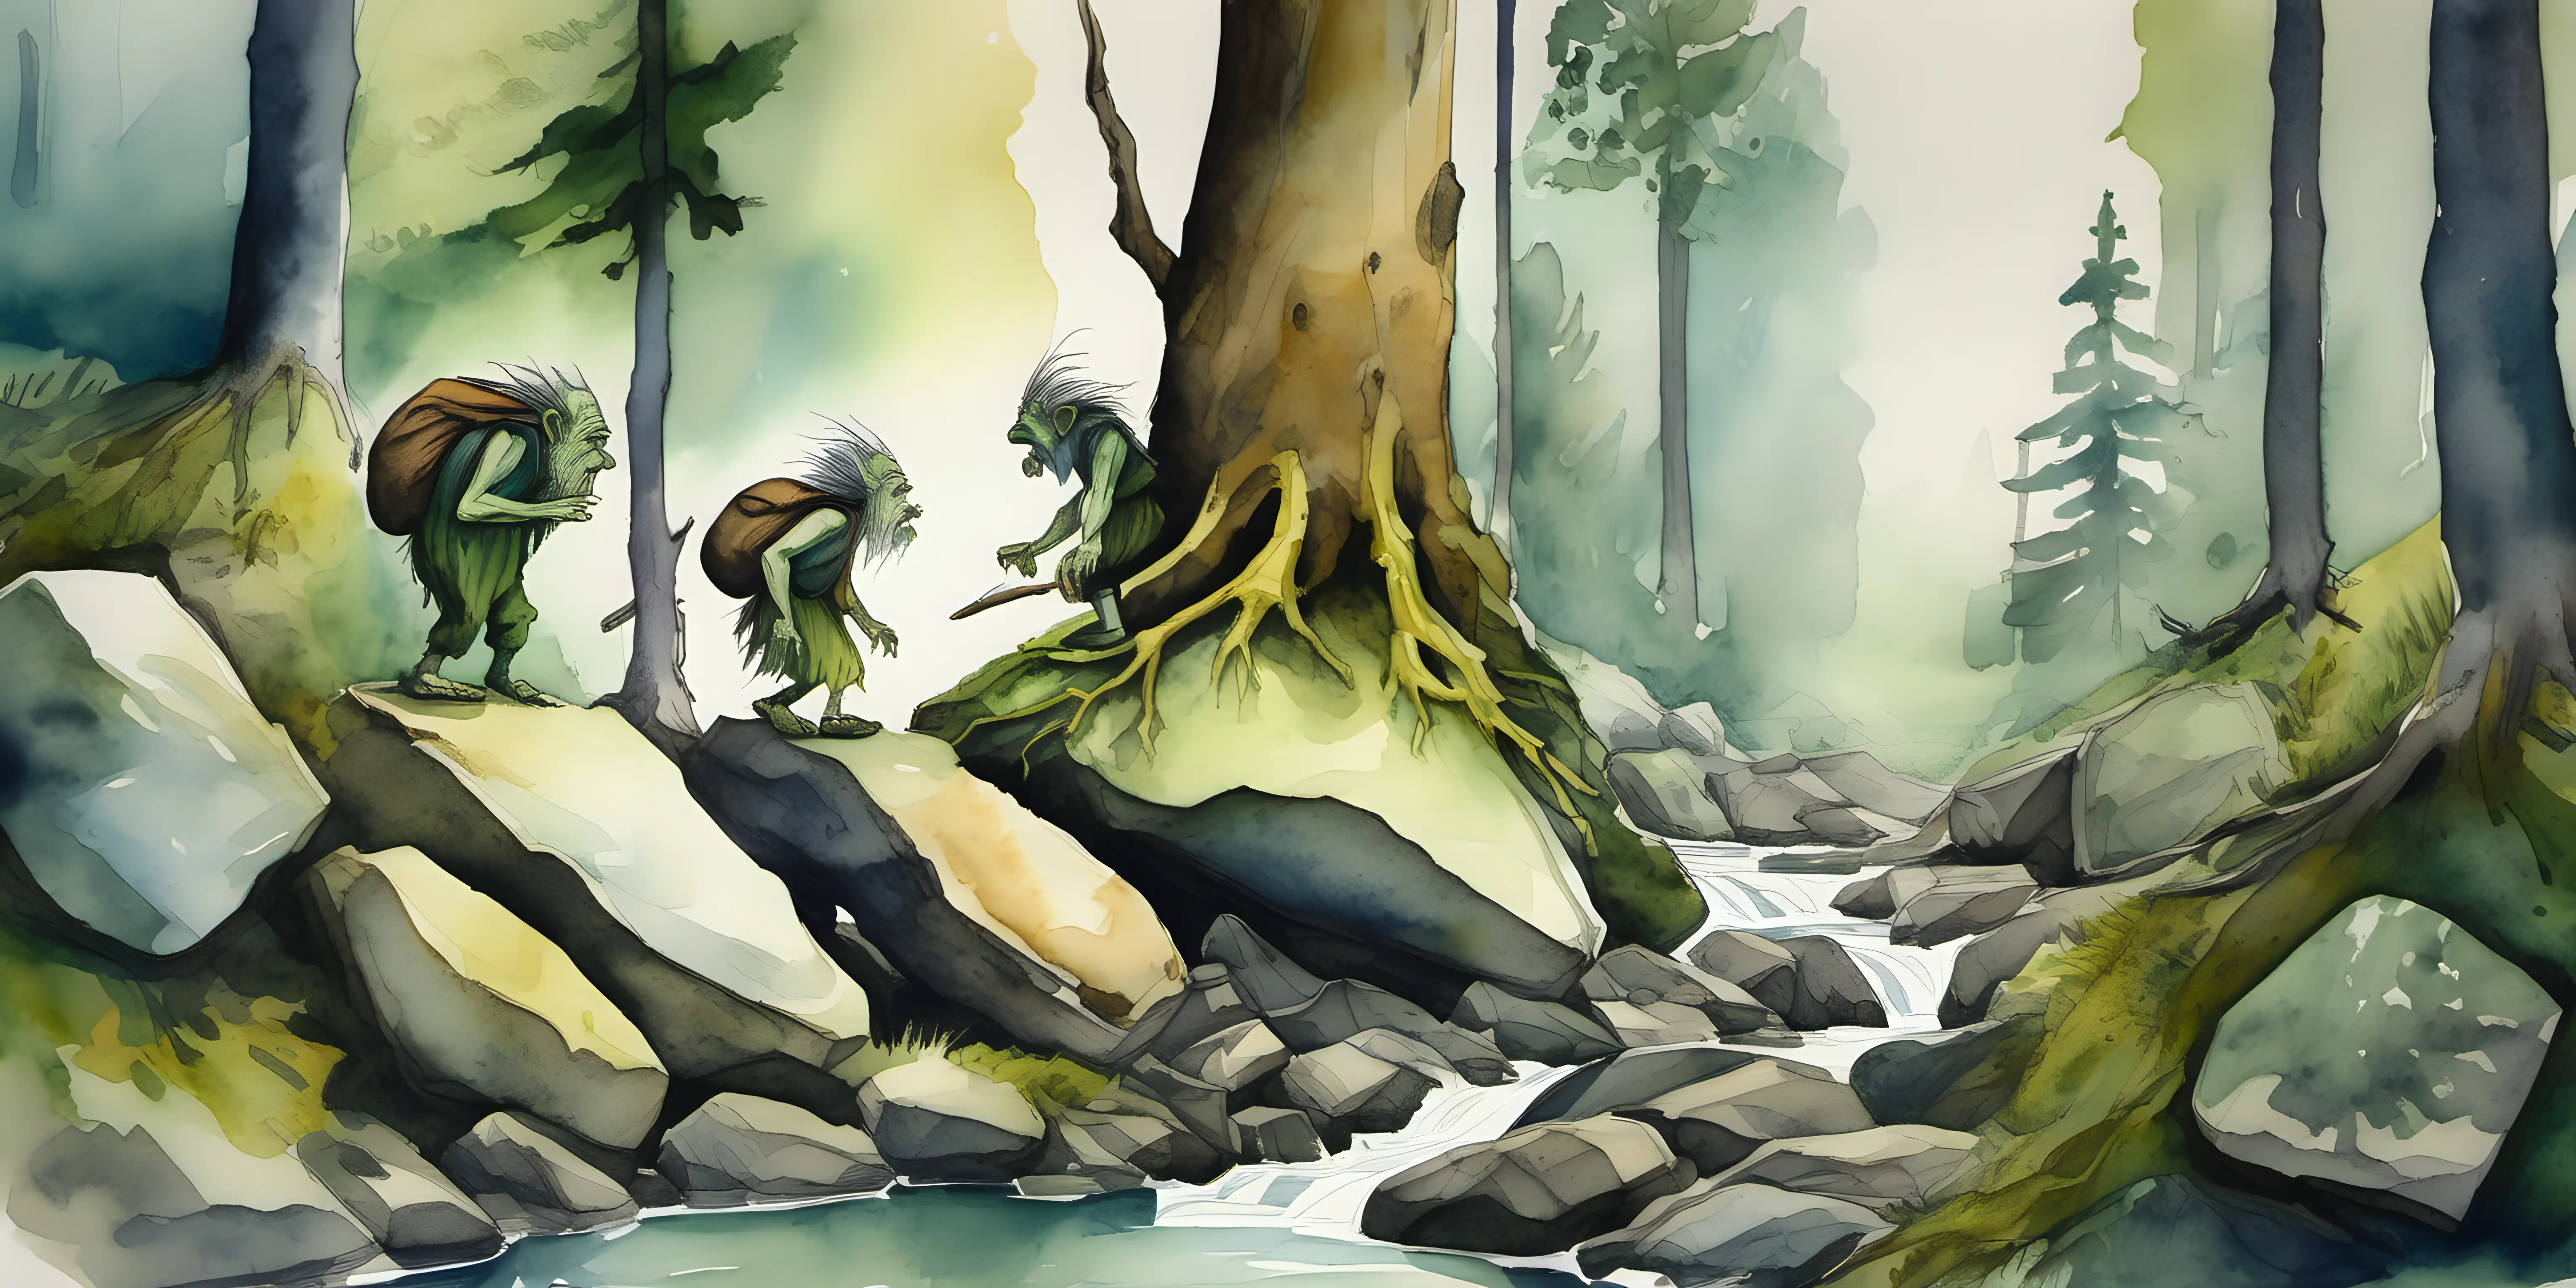 Norwegian Folklore Trolls in Ancient Pine Tree Forest Watercolor Painting